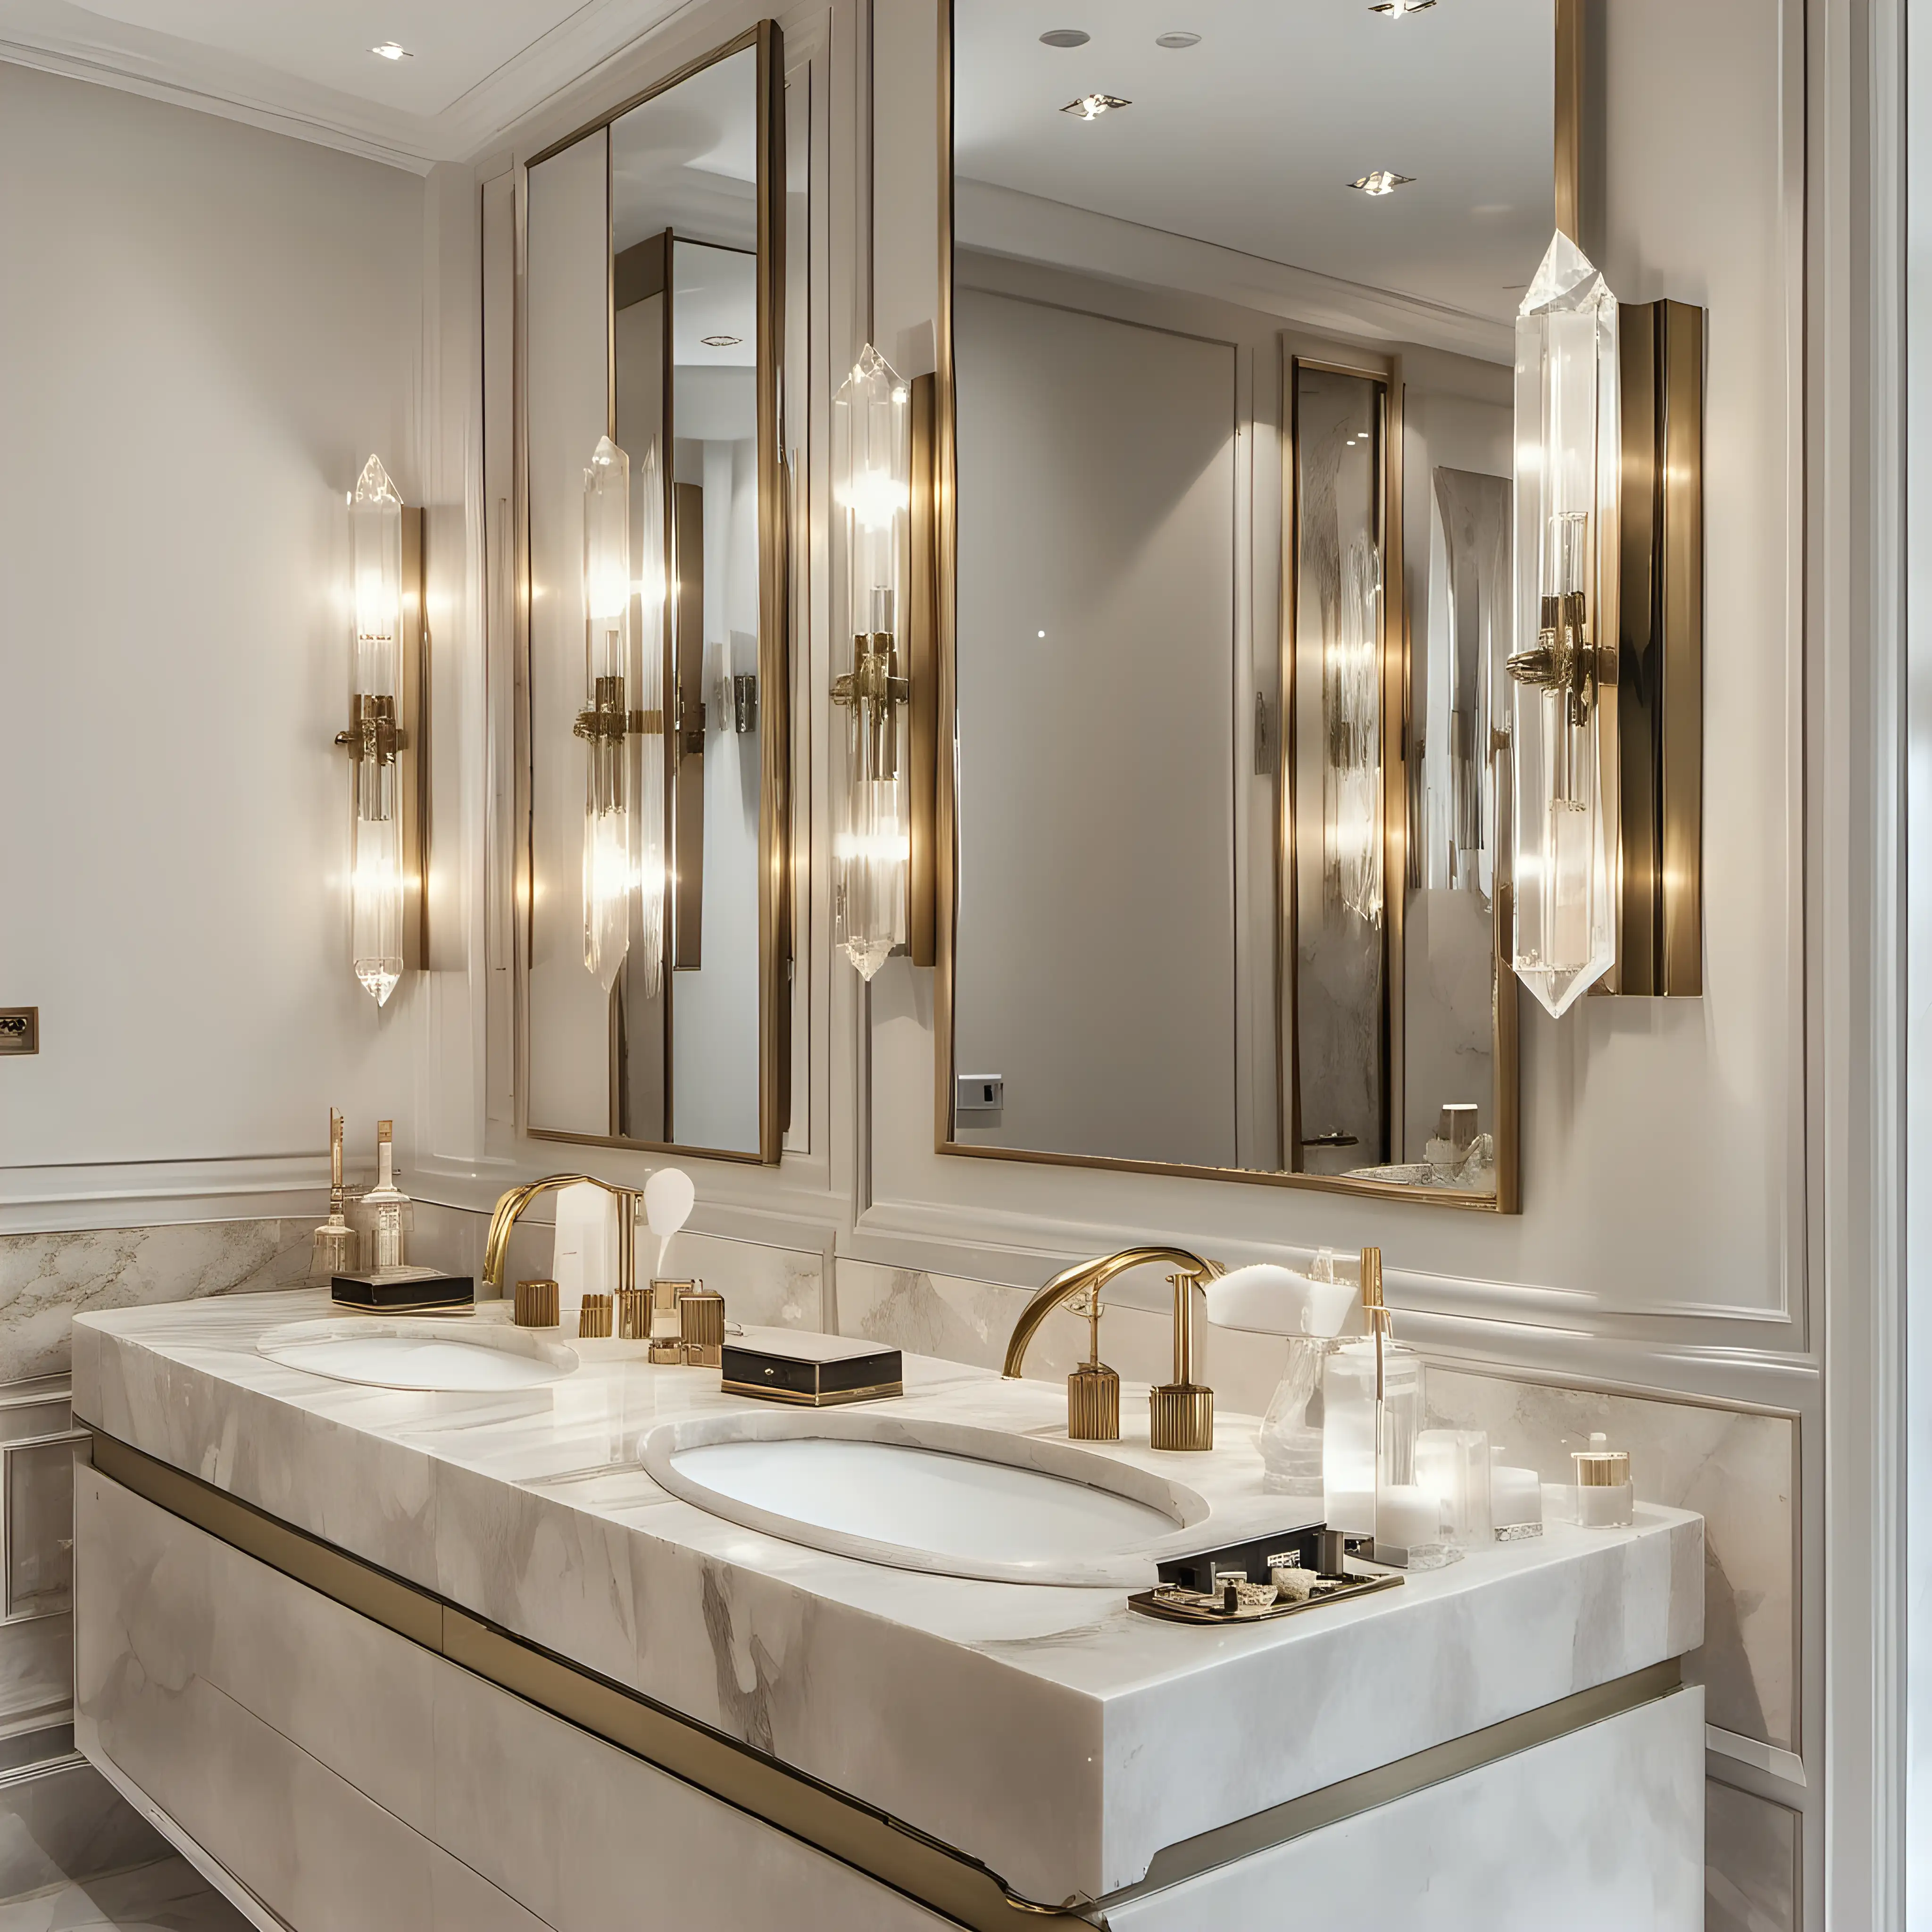 Luxury bathroom beige marble and antique brass accents, double vanity and mirrors. Crystal wall lights